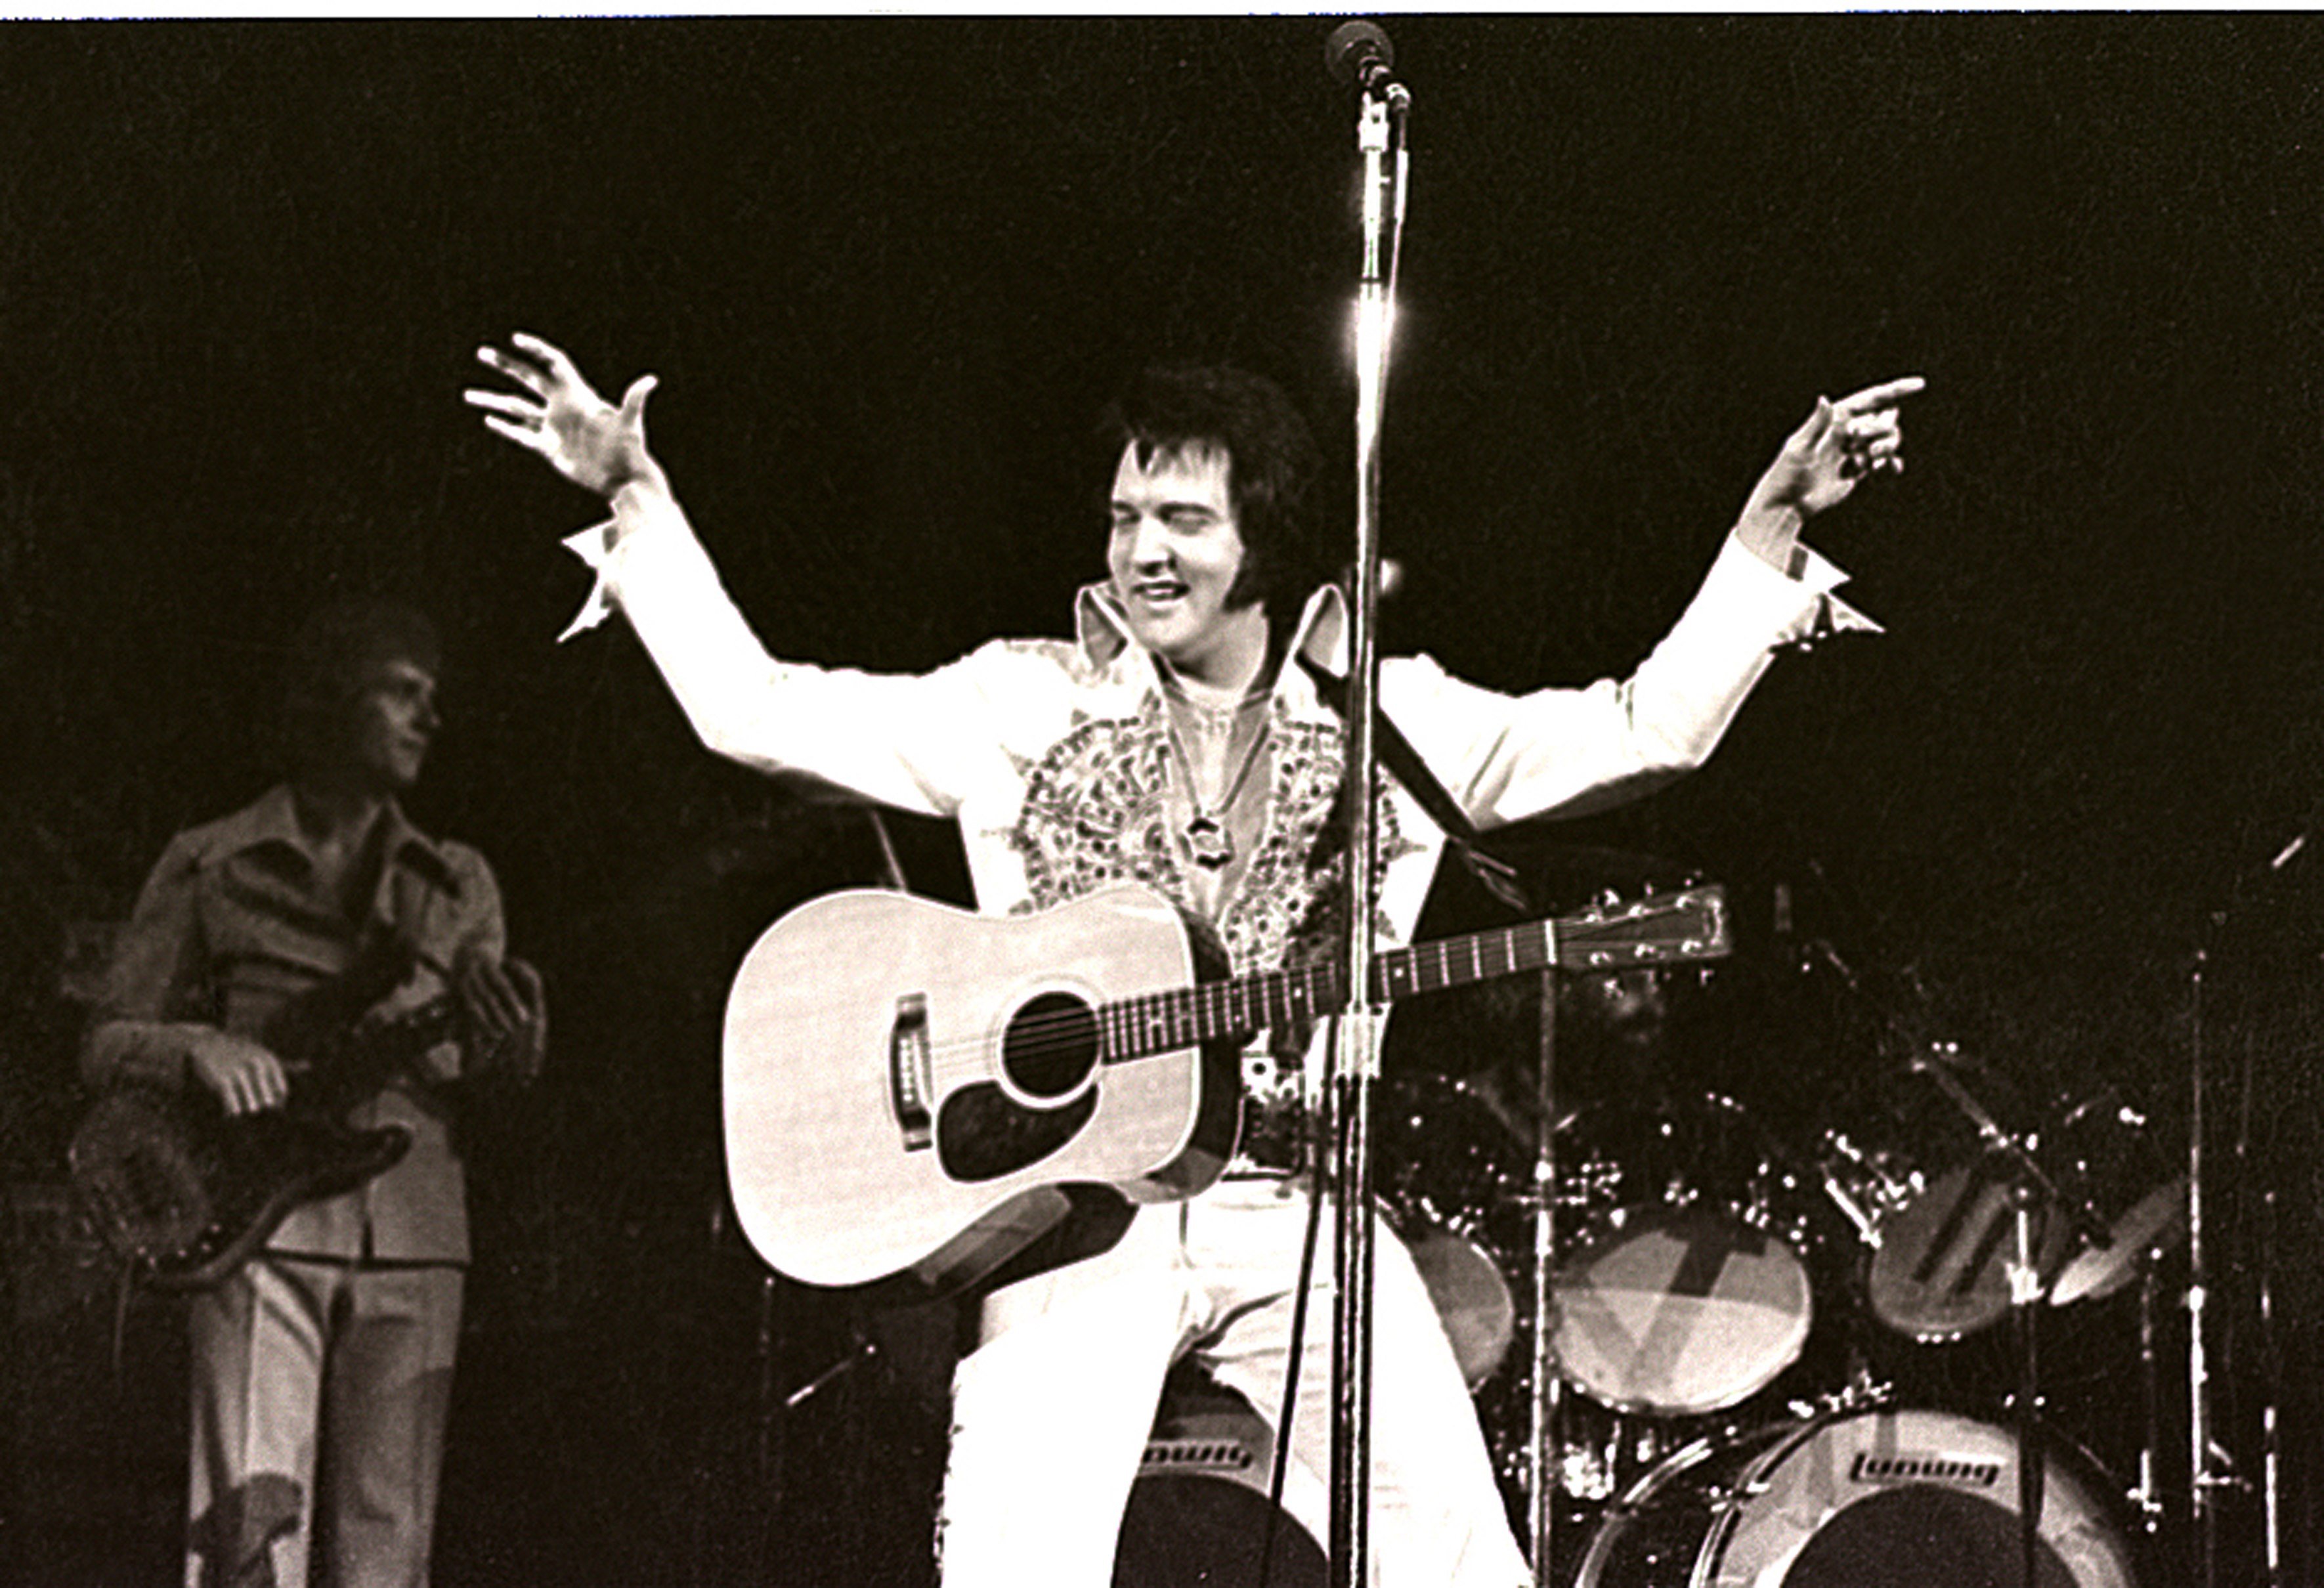 Music superstar and multi-Grammy awardee Elvis Presley during his 1977 performance in Milwaukee. | Photo: Getty Images